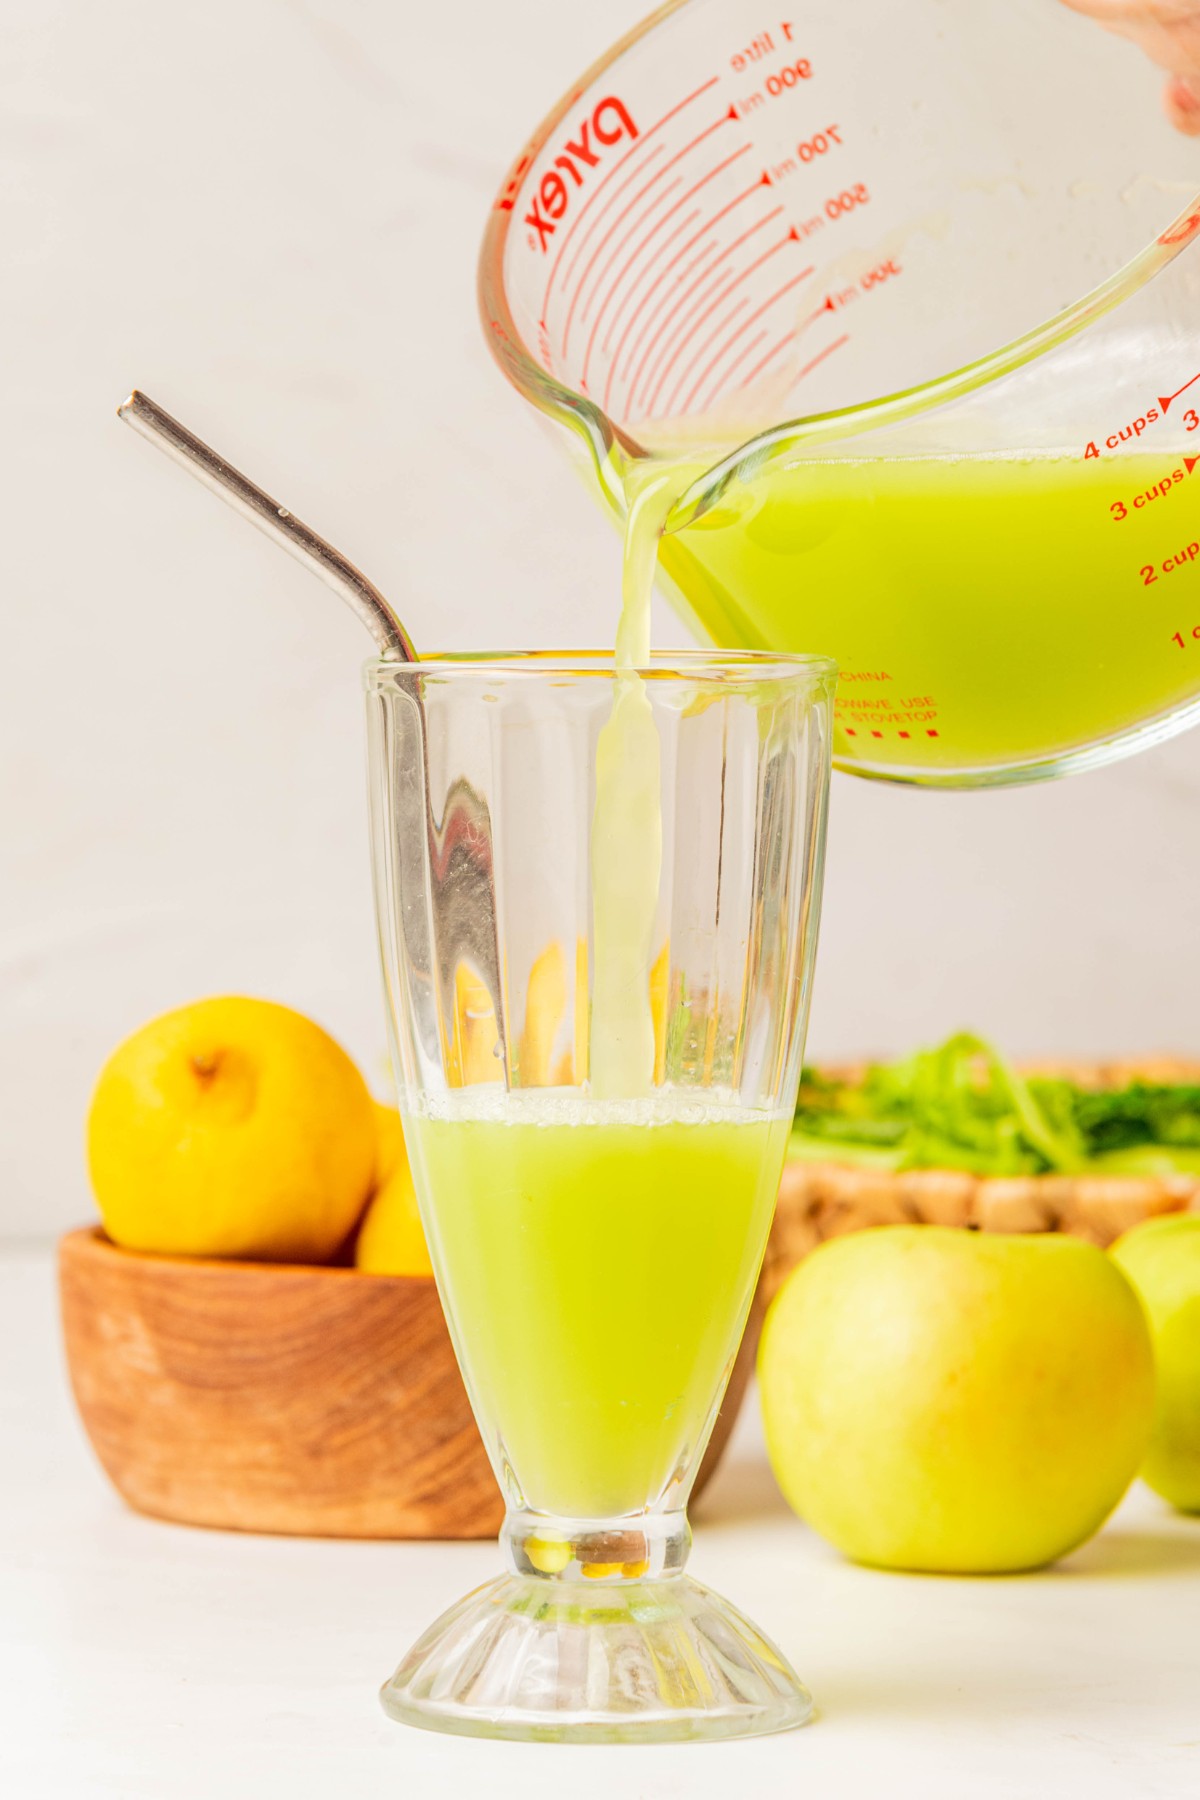 pouring homemade green juice into glass cup